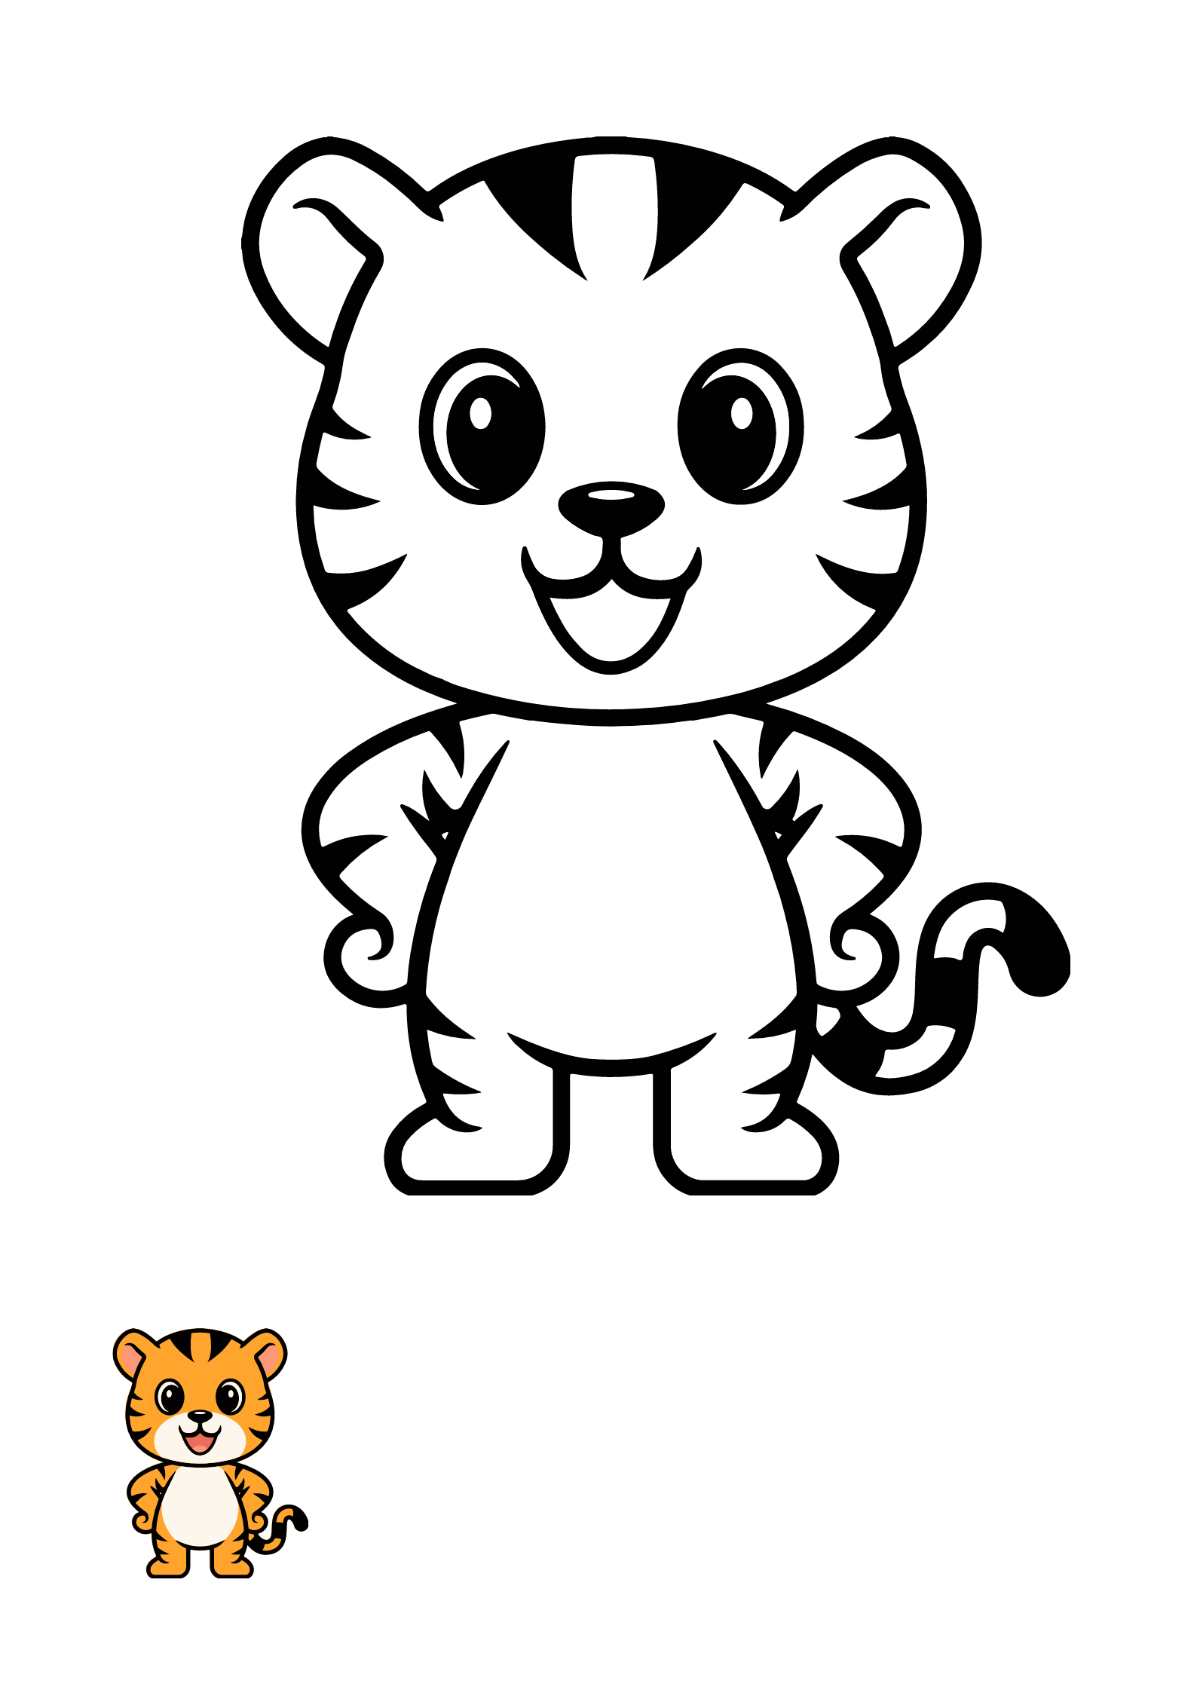 Tiger Cub Coloring Page Template